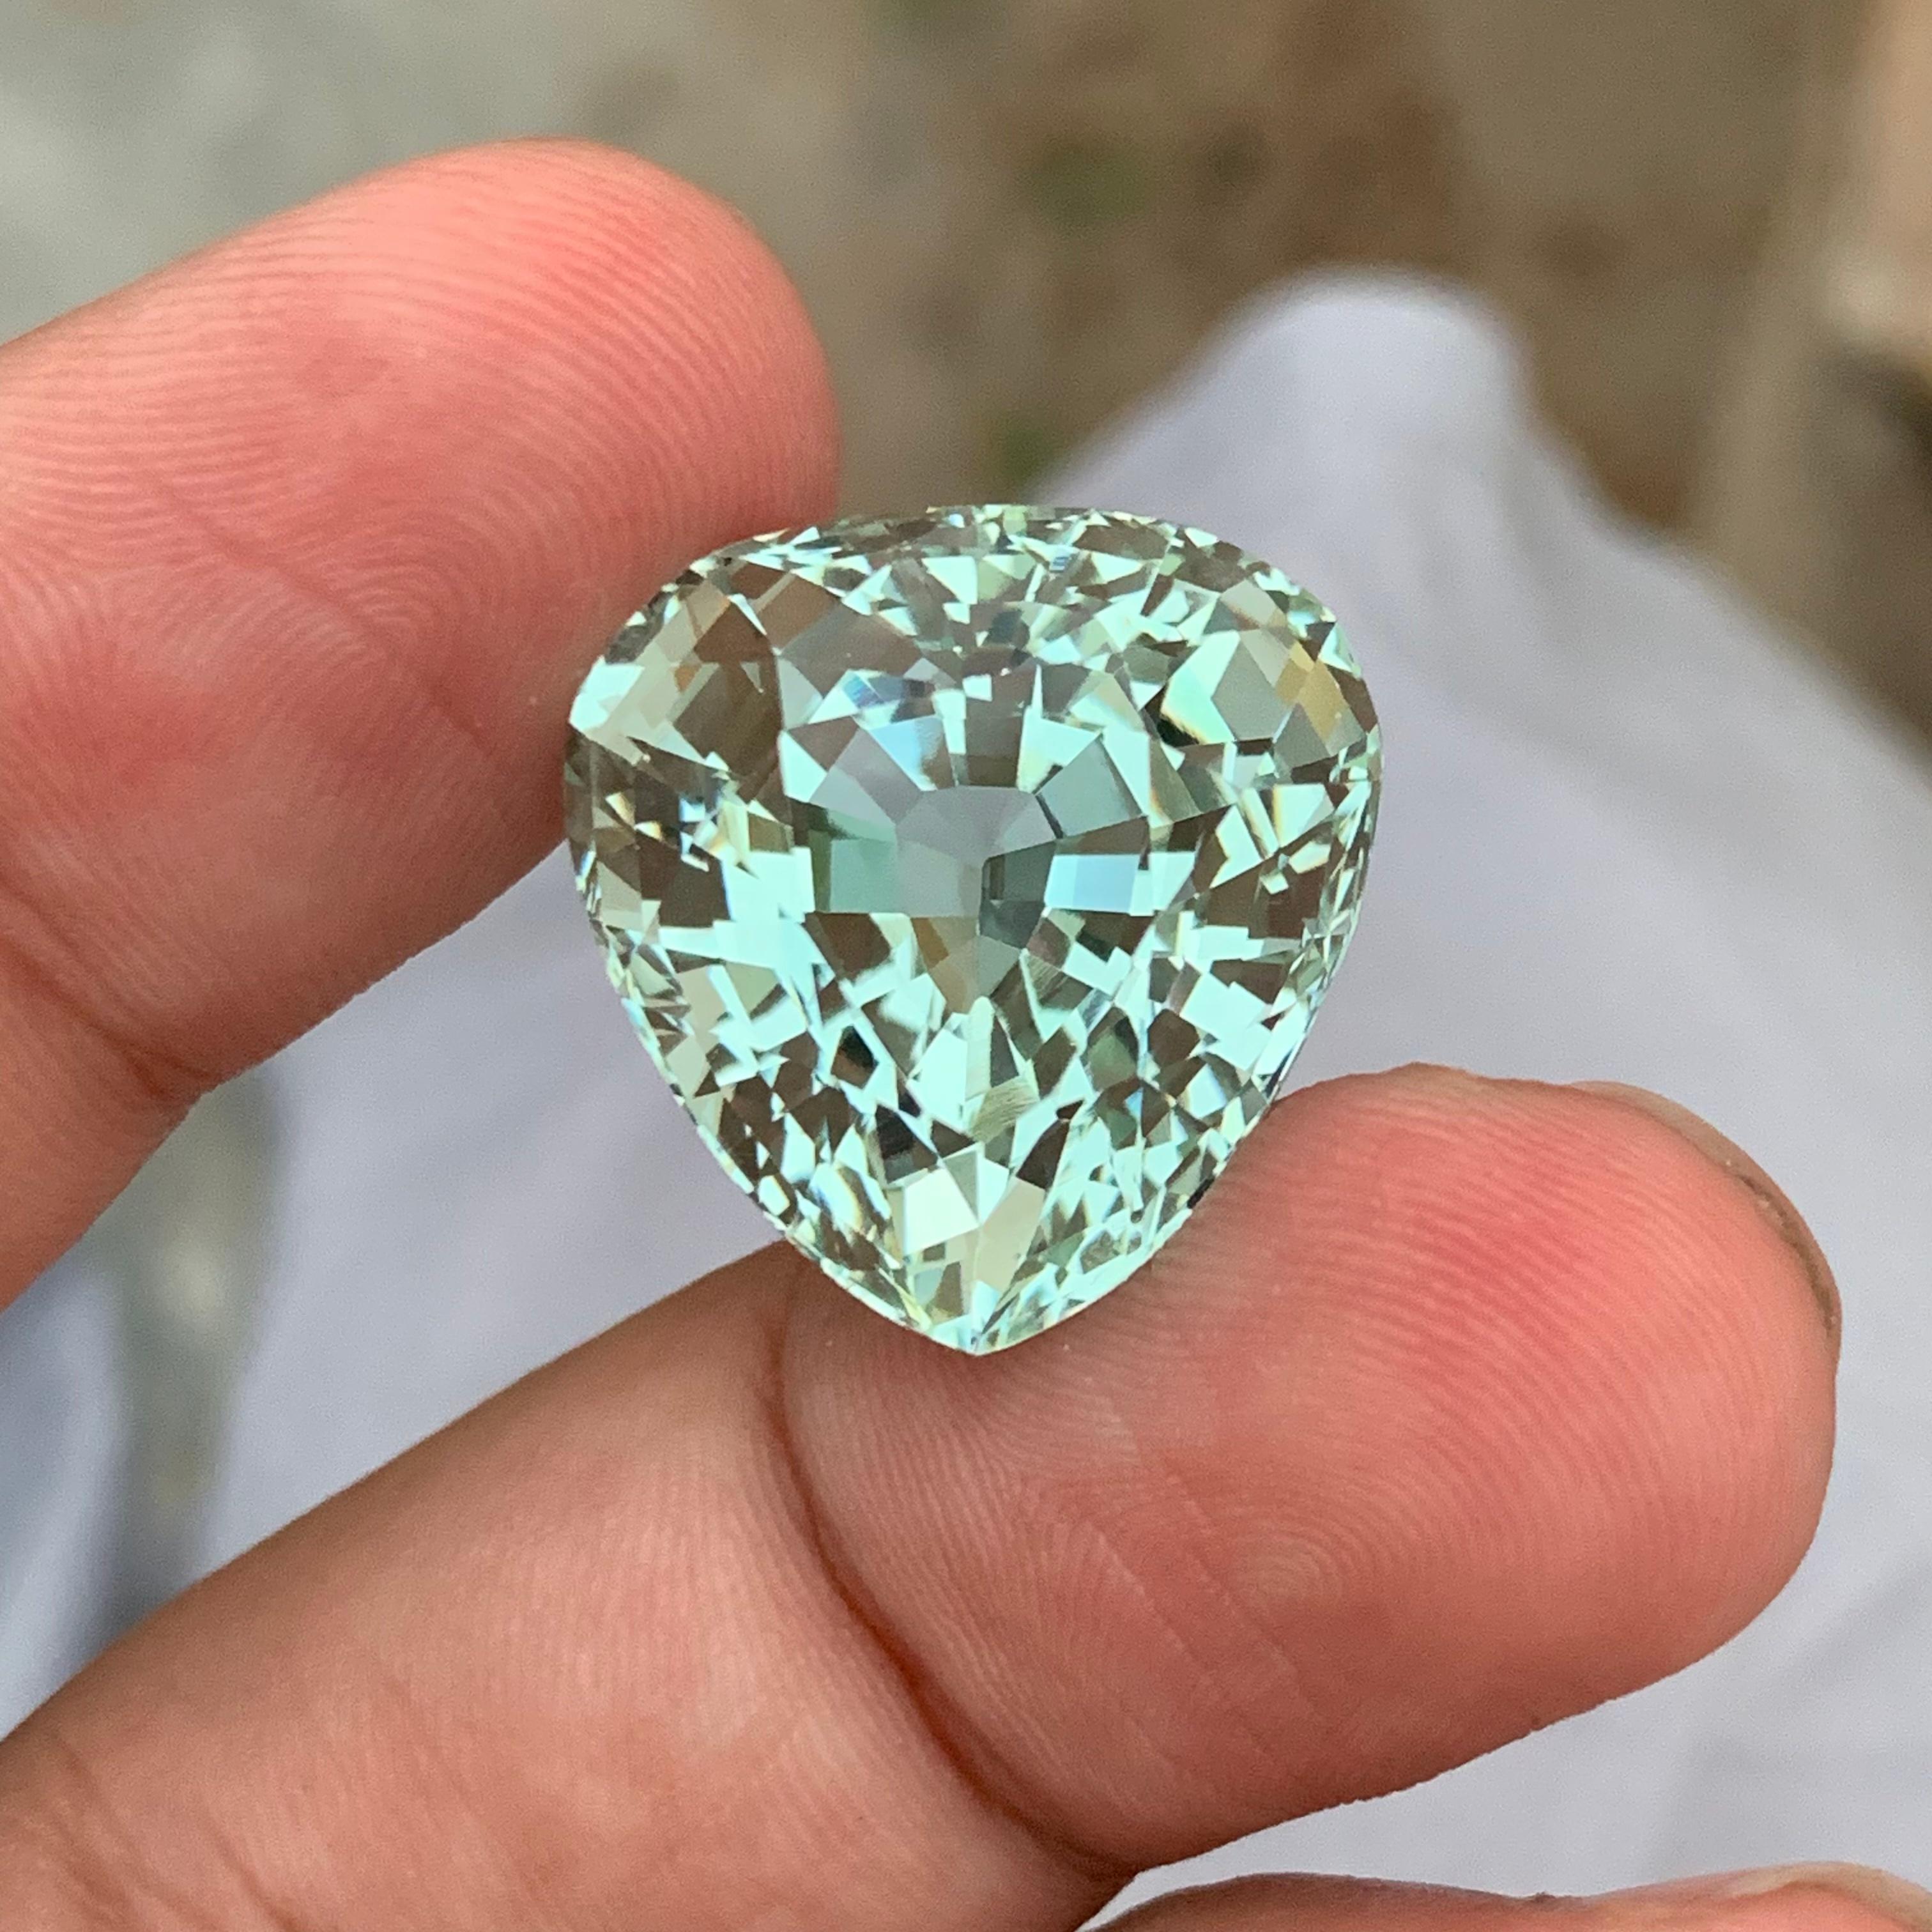 Aesthetic Movement 29.65 Carats Stunning Natural Loose Green Aquamarine Pear Shape From Africa Mine For Sale